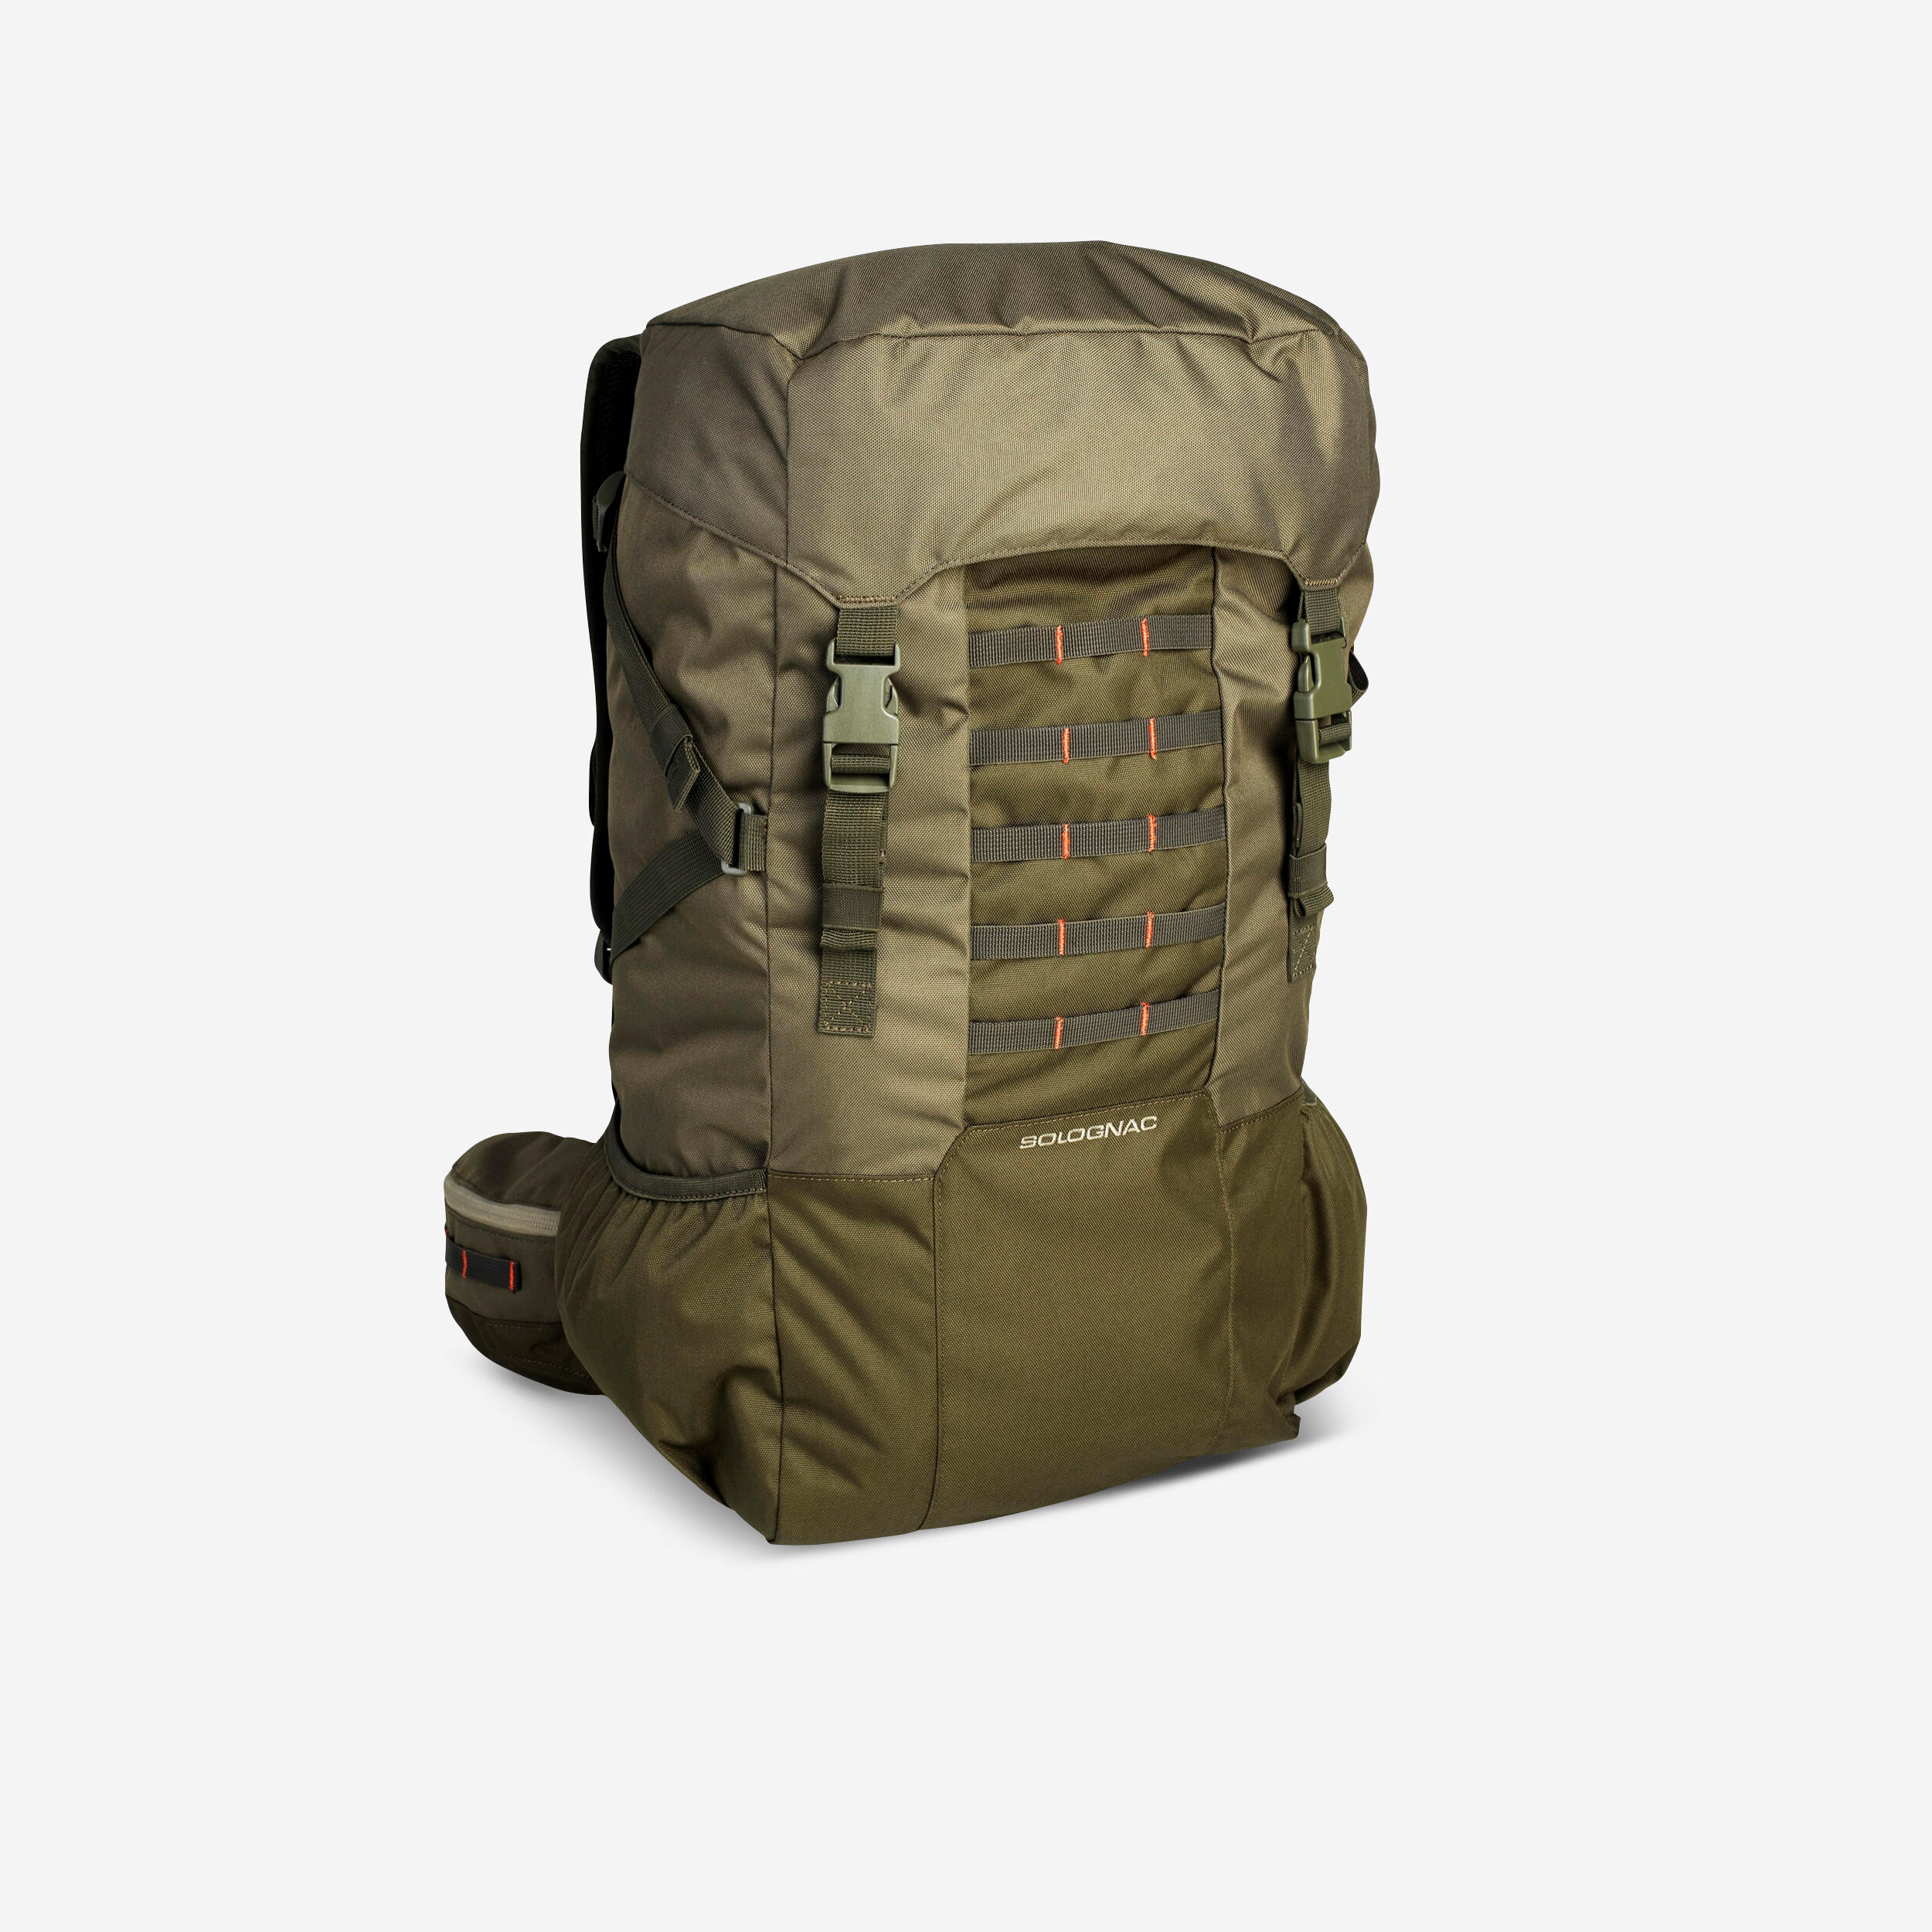 SOLOGNAC 50L Backpack for Camping - Green